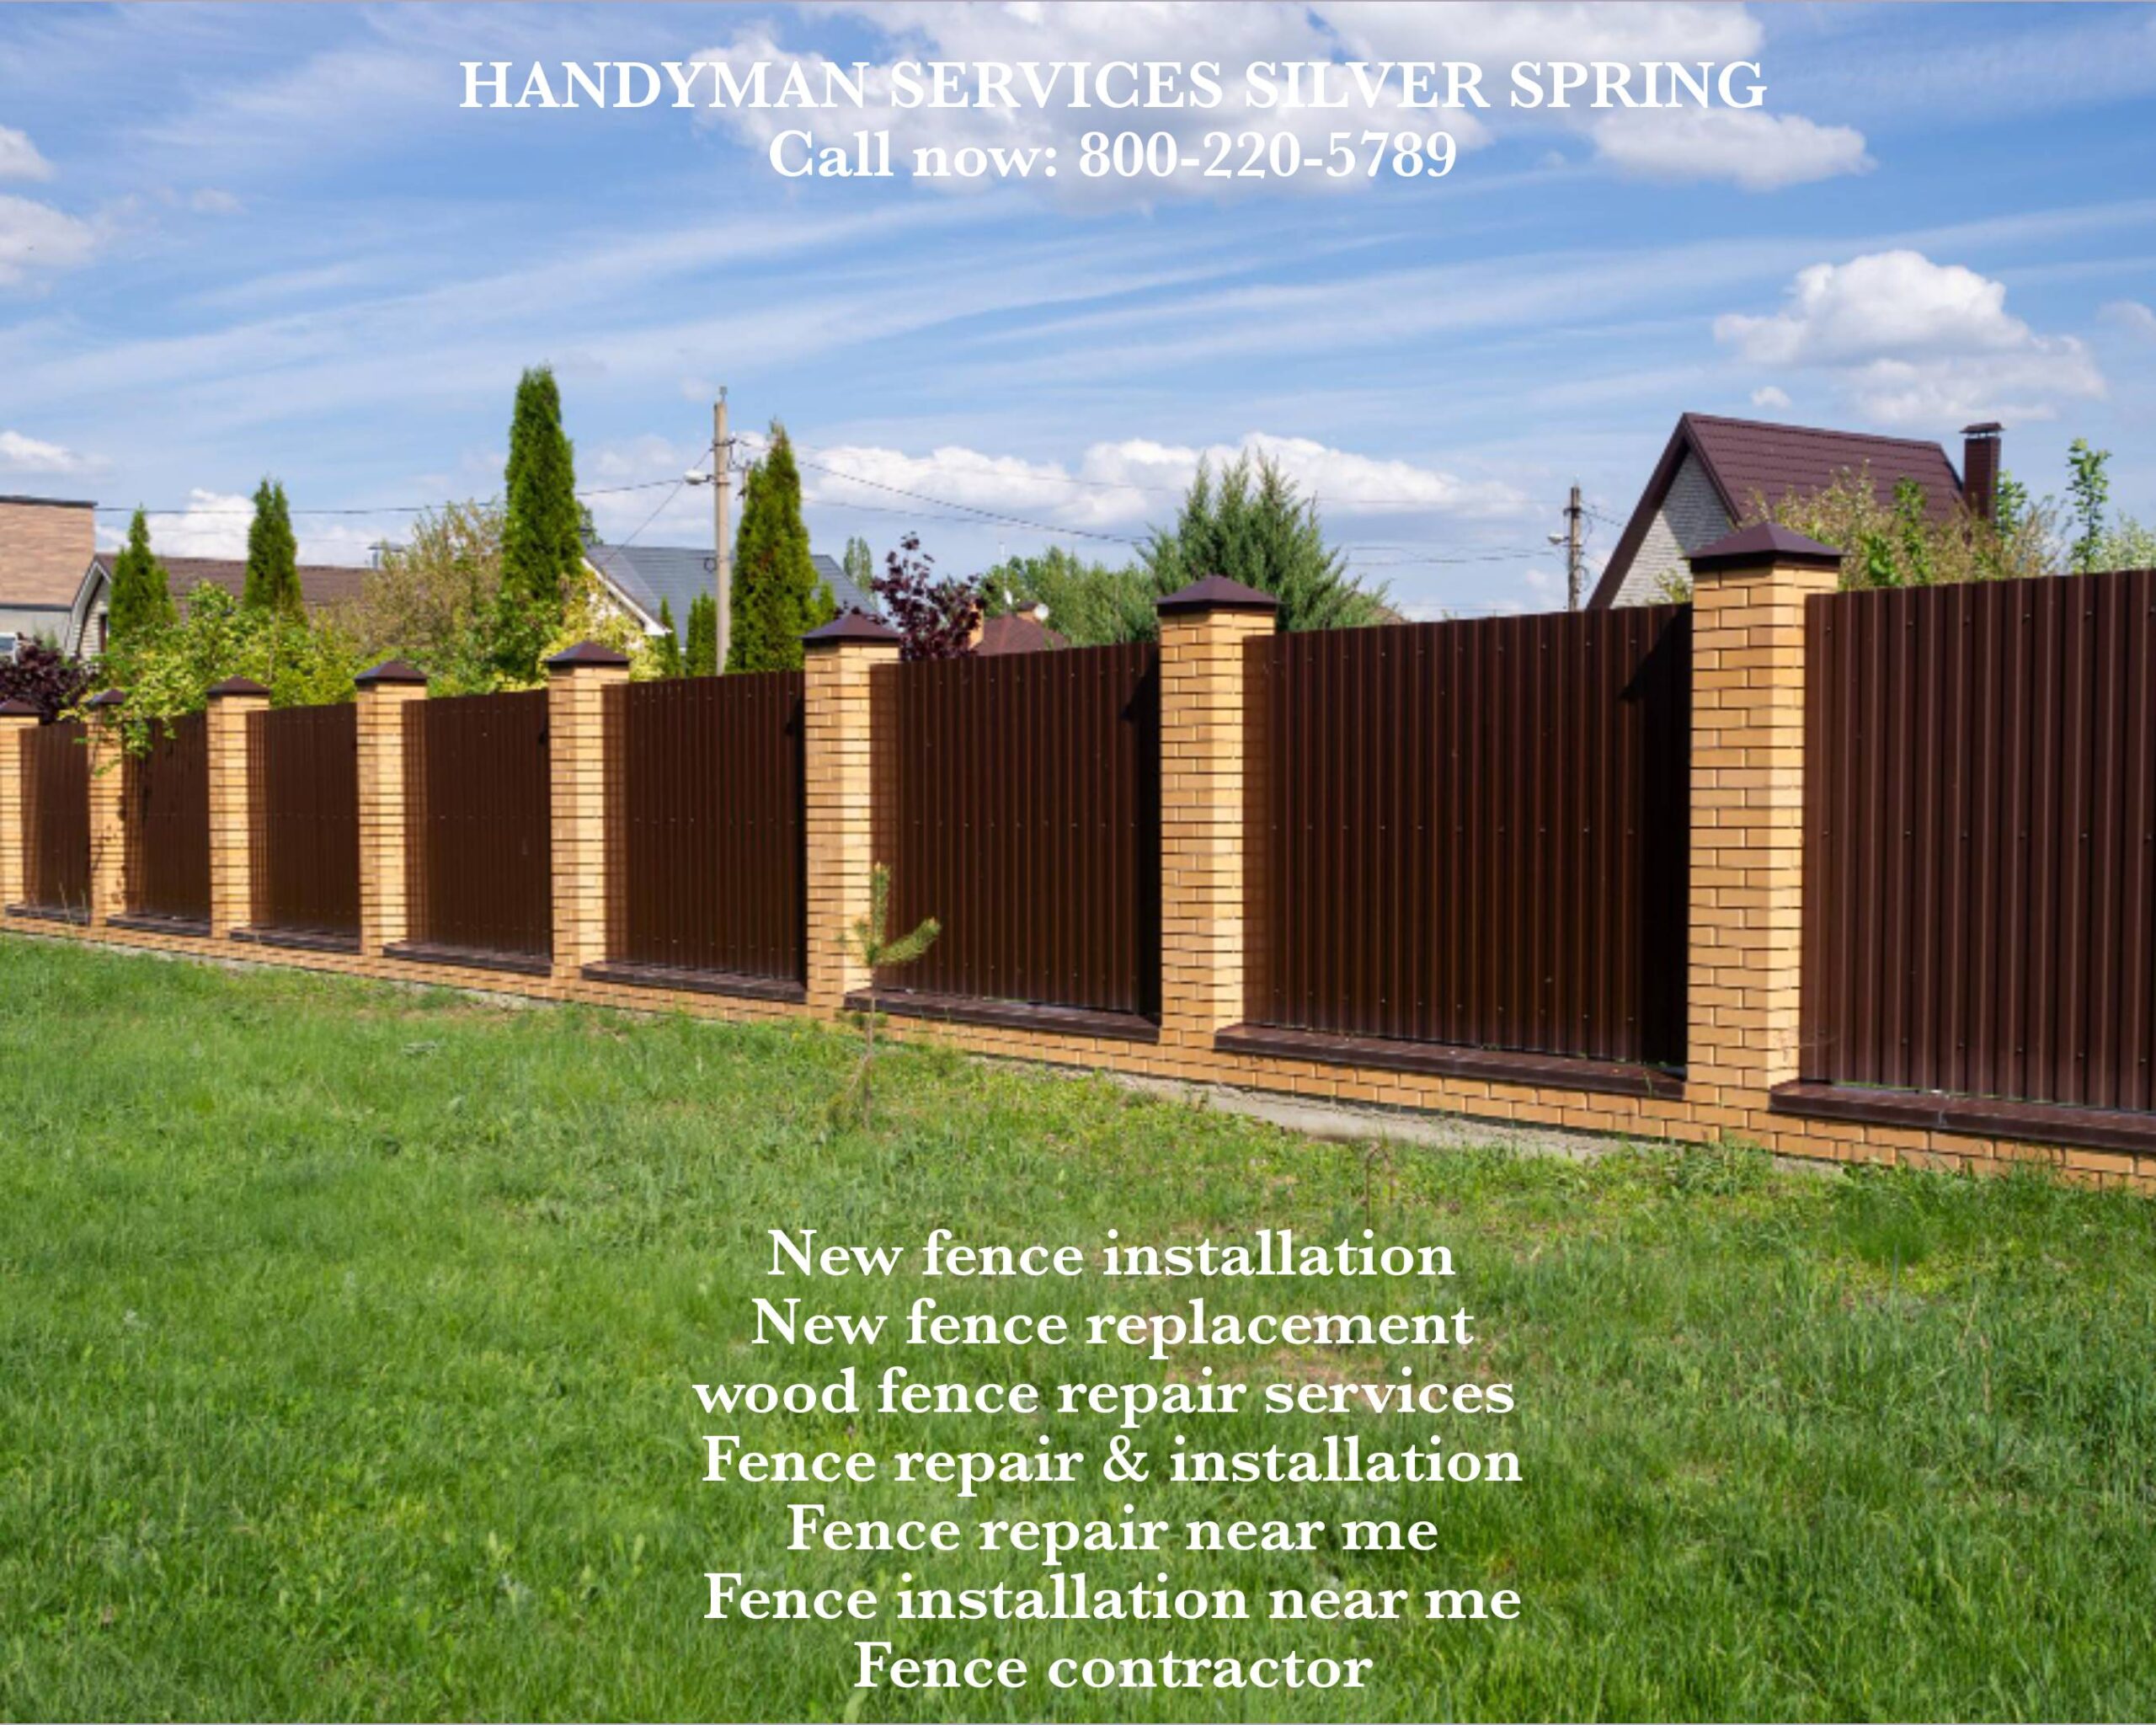 Experience the Pinnacle of Quality and Affordability with Our Fence Service